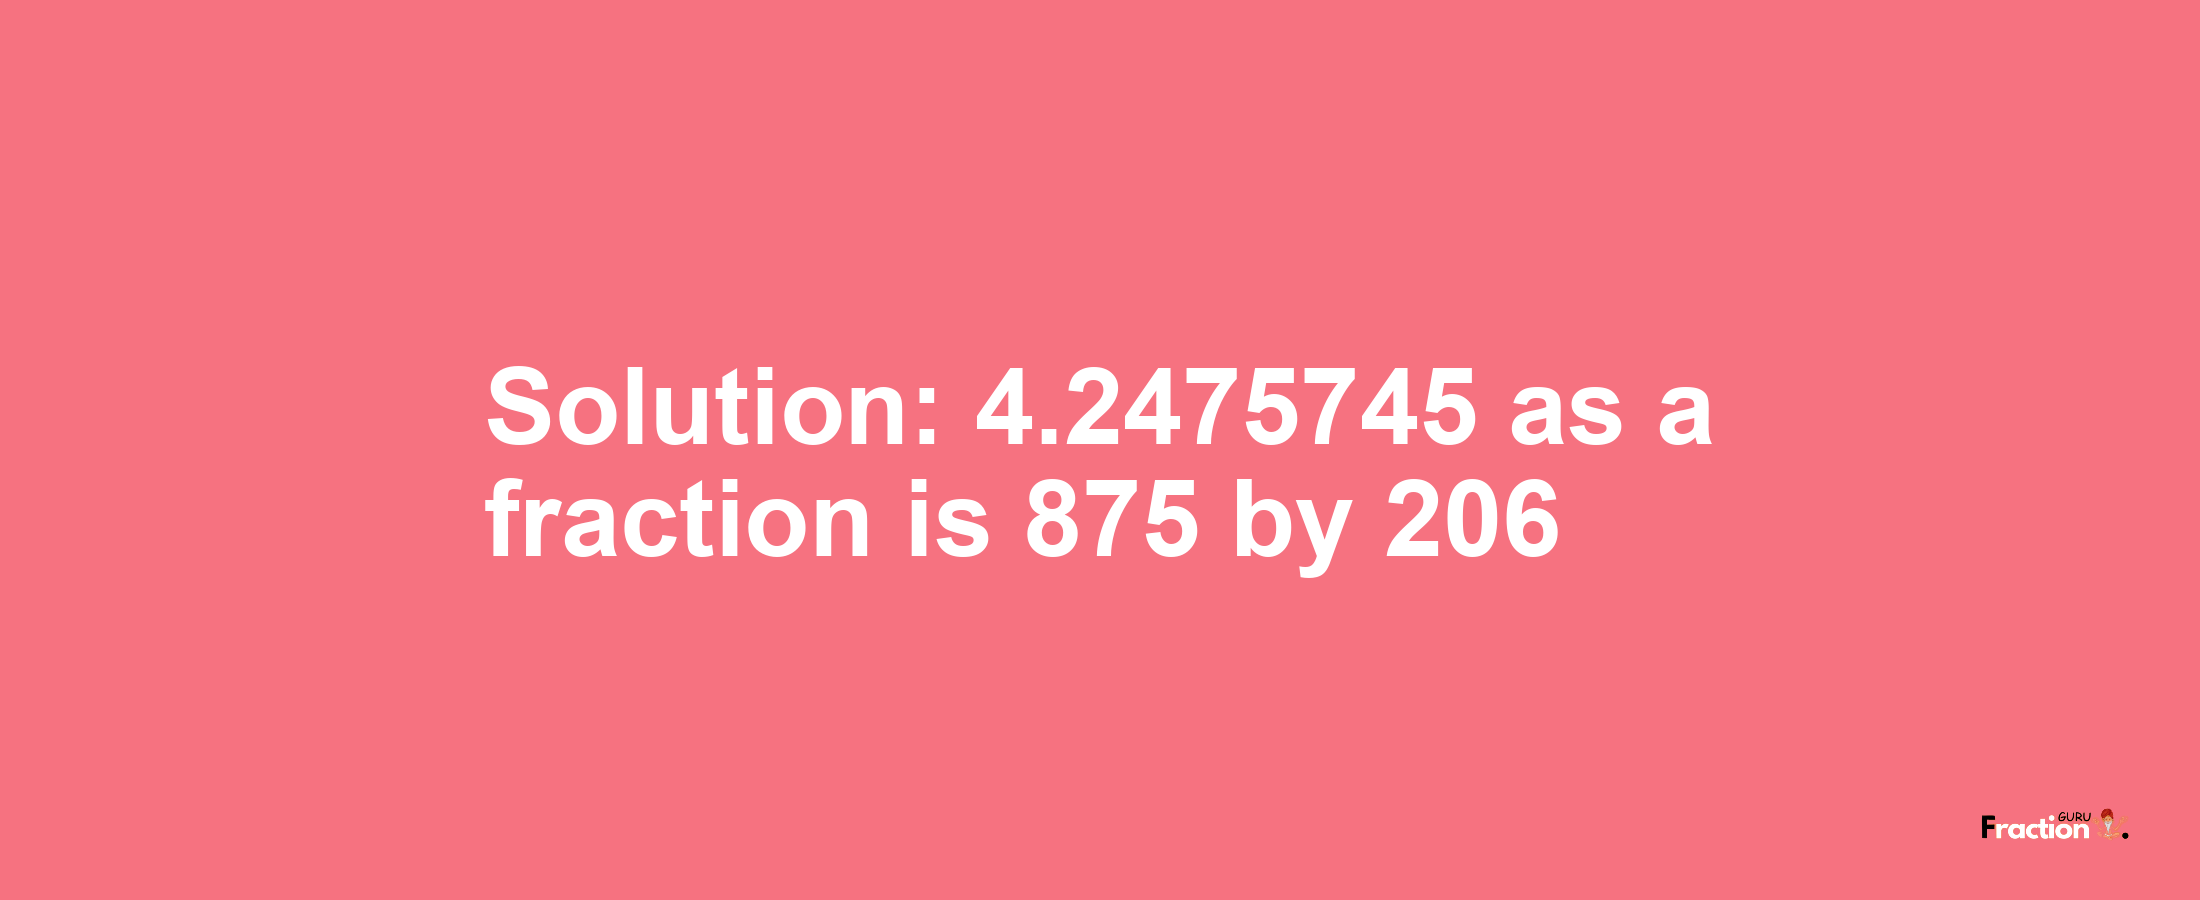 Solution:4.2475745 as a fraction is 875/206